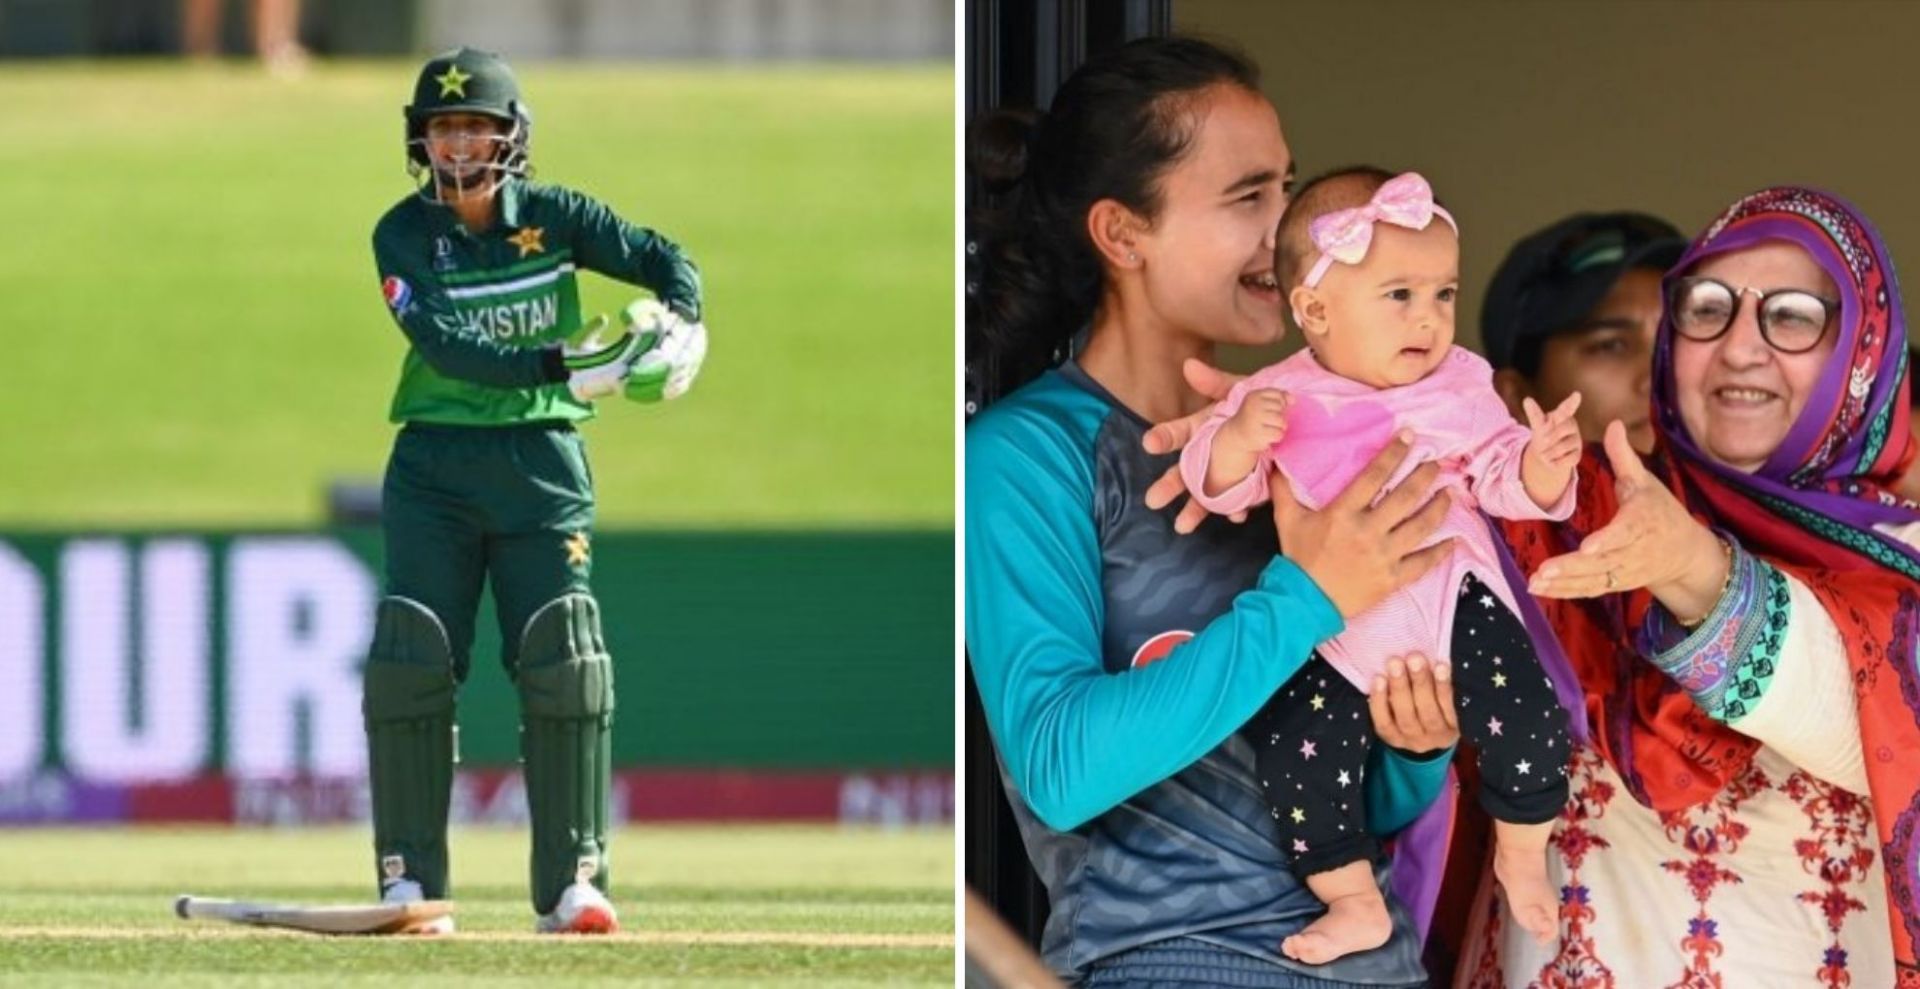 Bismah Mahroof has travelled to New Zealand for the World Cup with her six-month-old daughter (Credits: Bismah Maroof/Twitter)